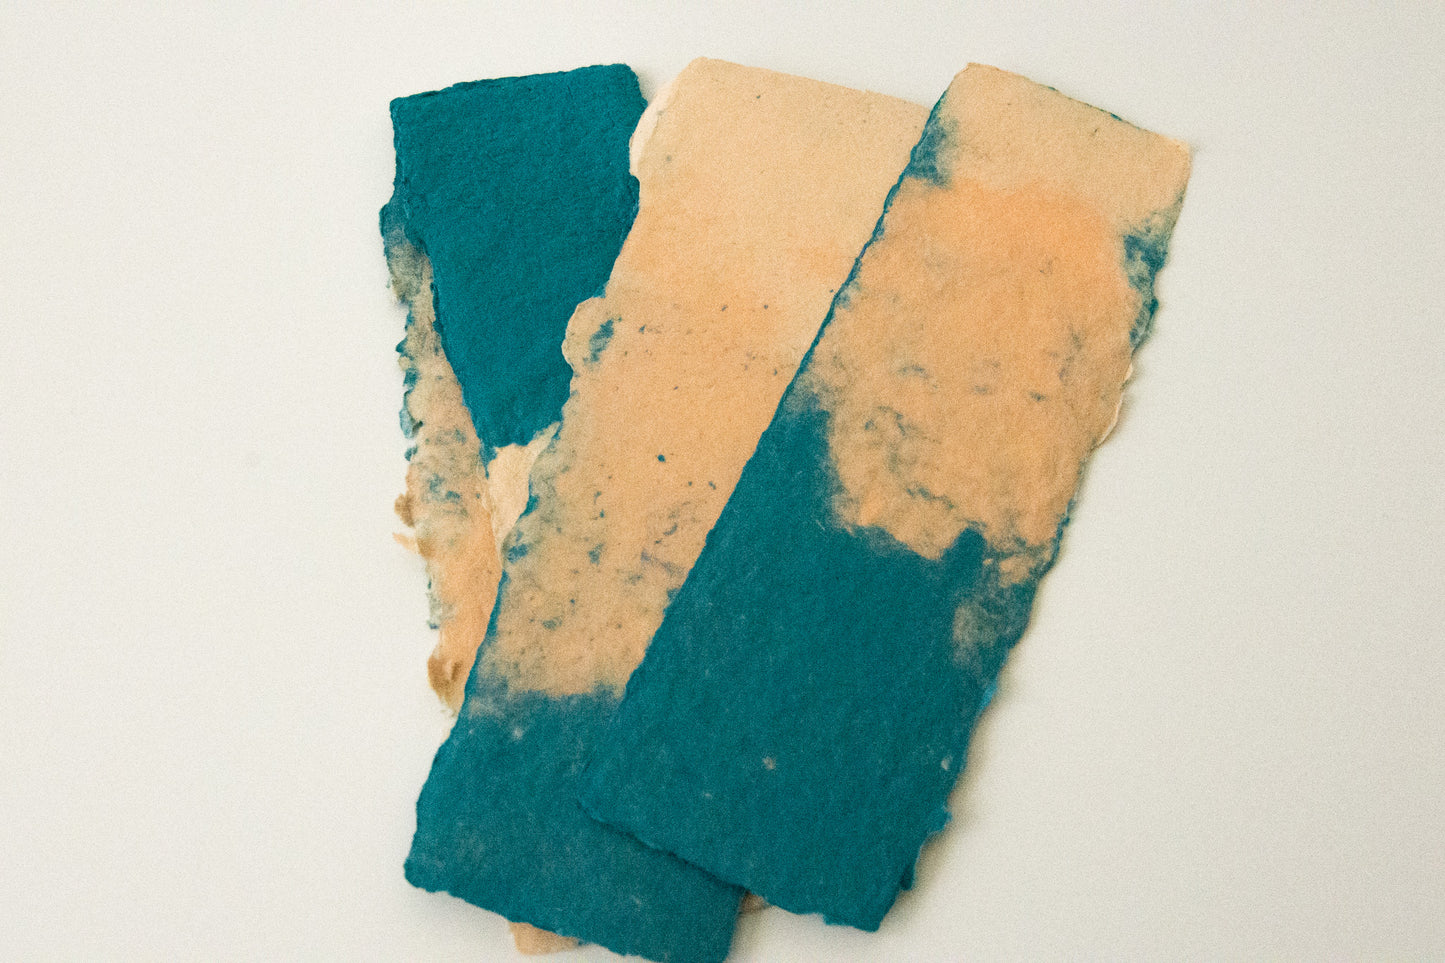 Abstract Bookmark | Handmade Paper | Deckle Edges